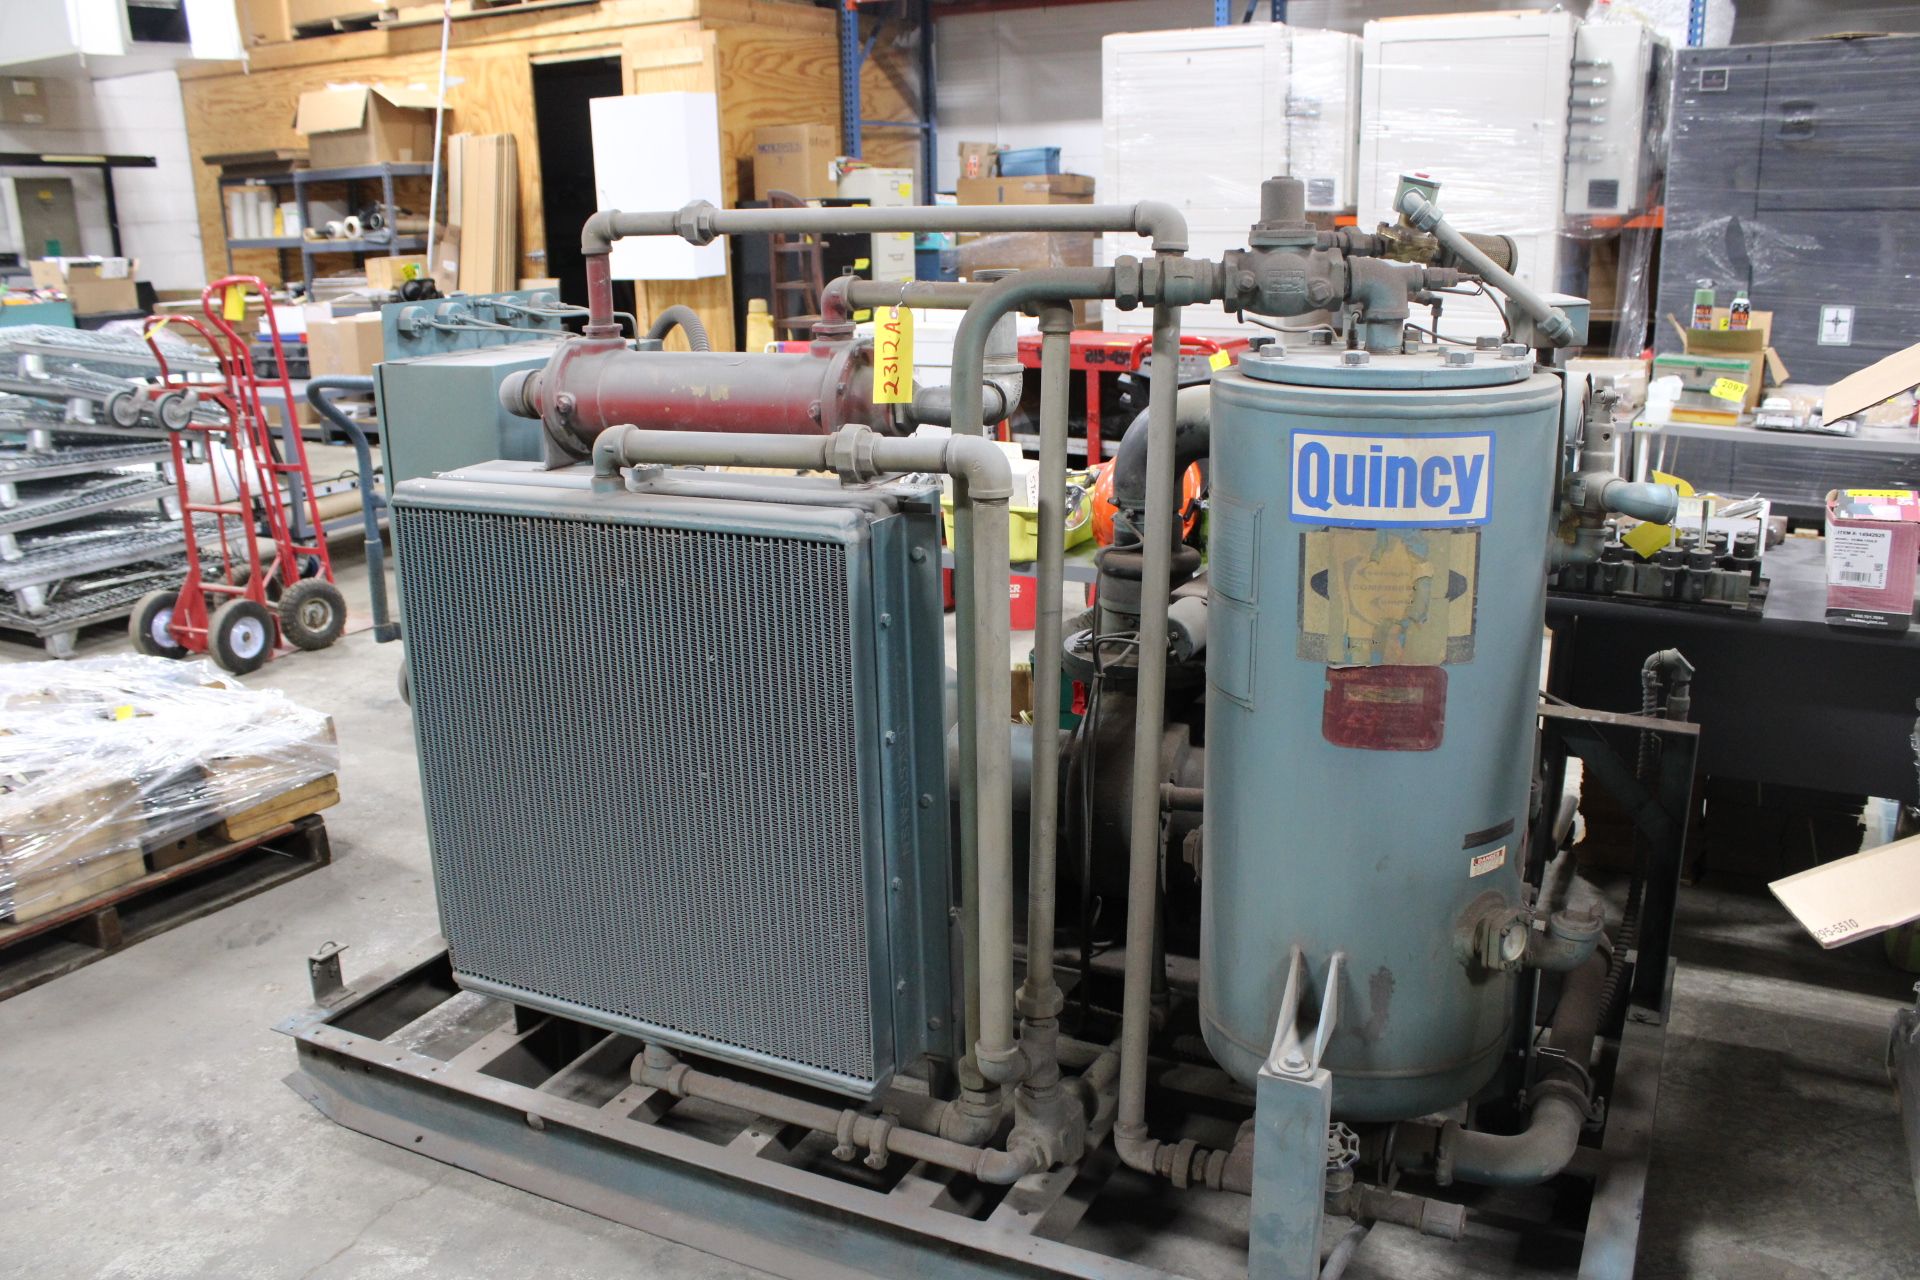 QUINCY MODEL Q235 50HP AIR COMPRESSOR WITH AUTO DUAL CONTROL, 19,267 HOURS ON METER - Image 4 of 4